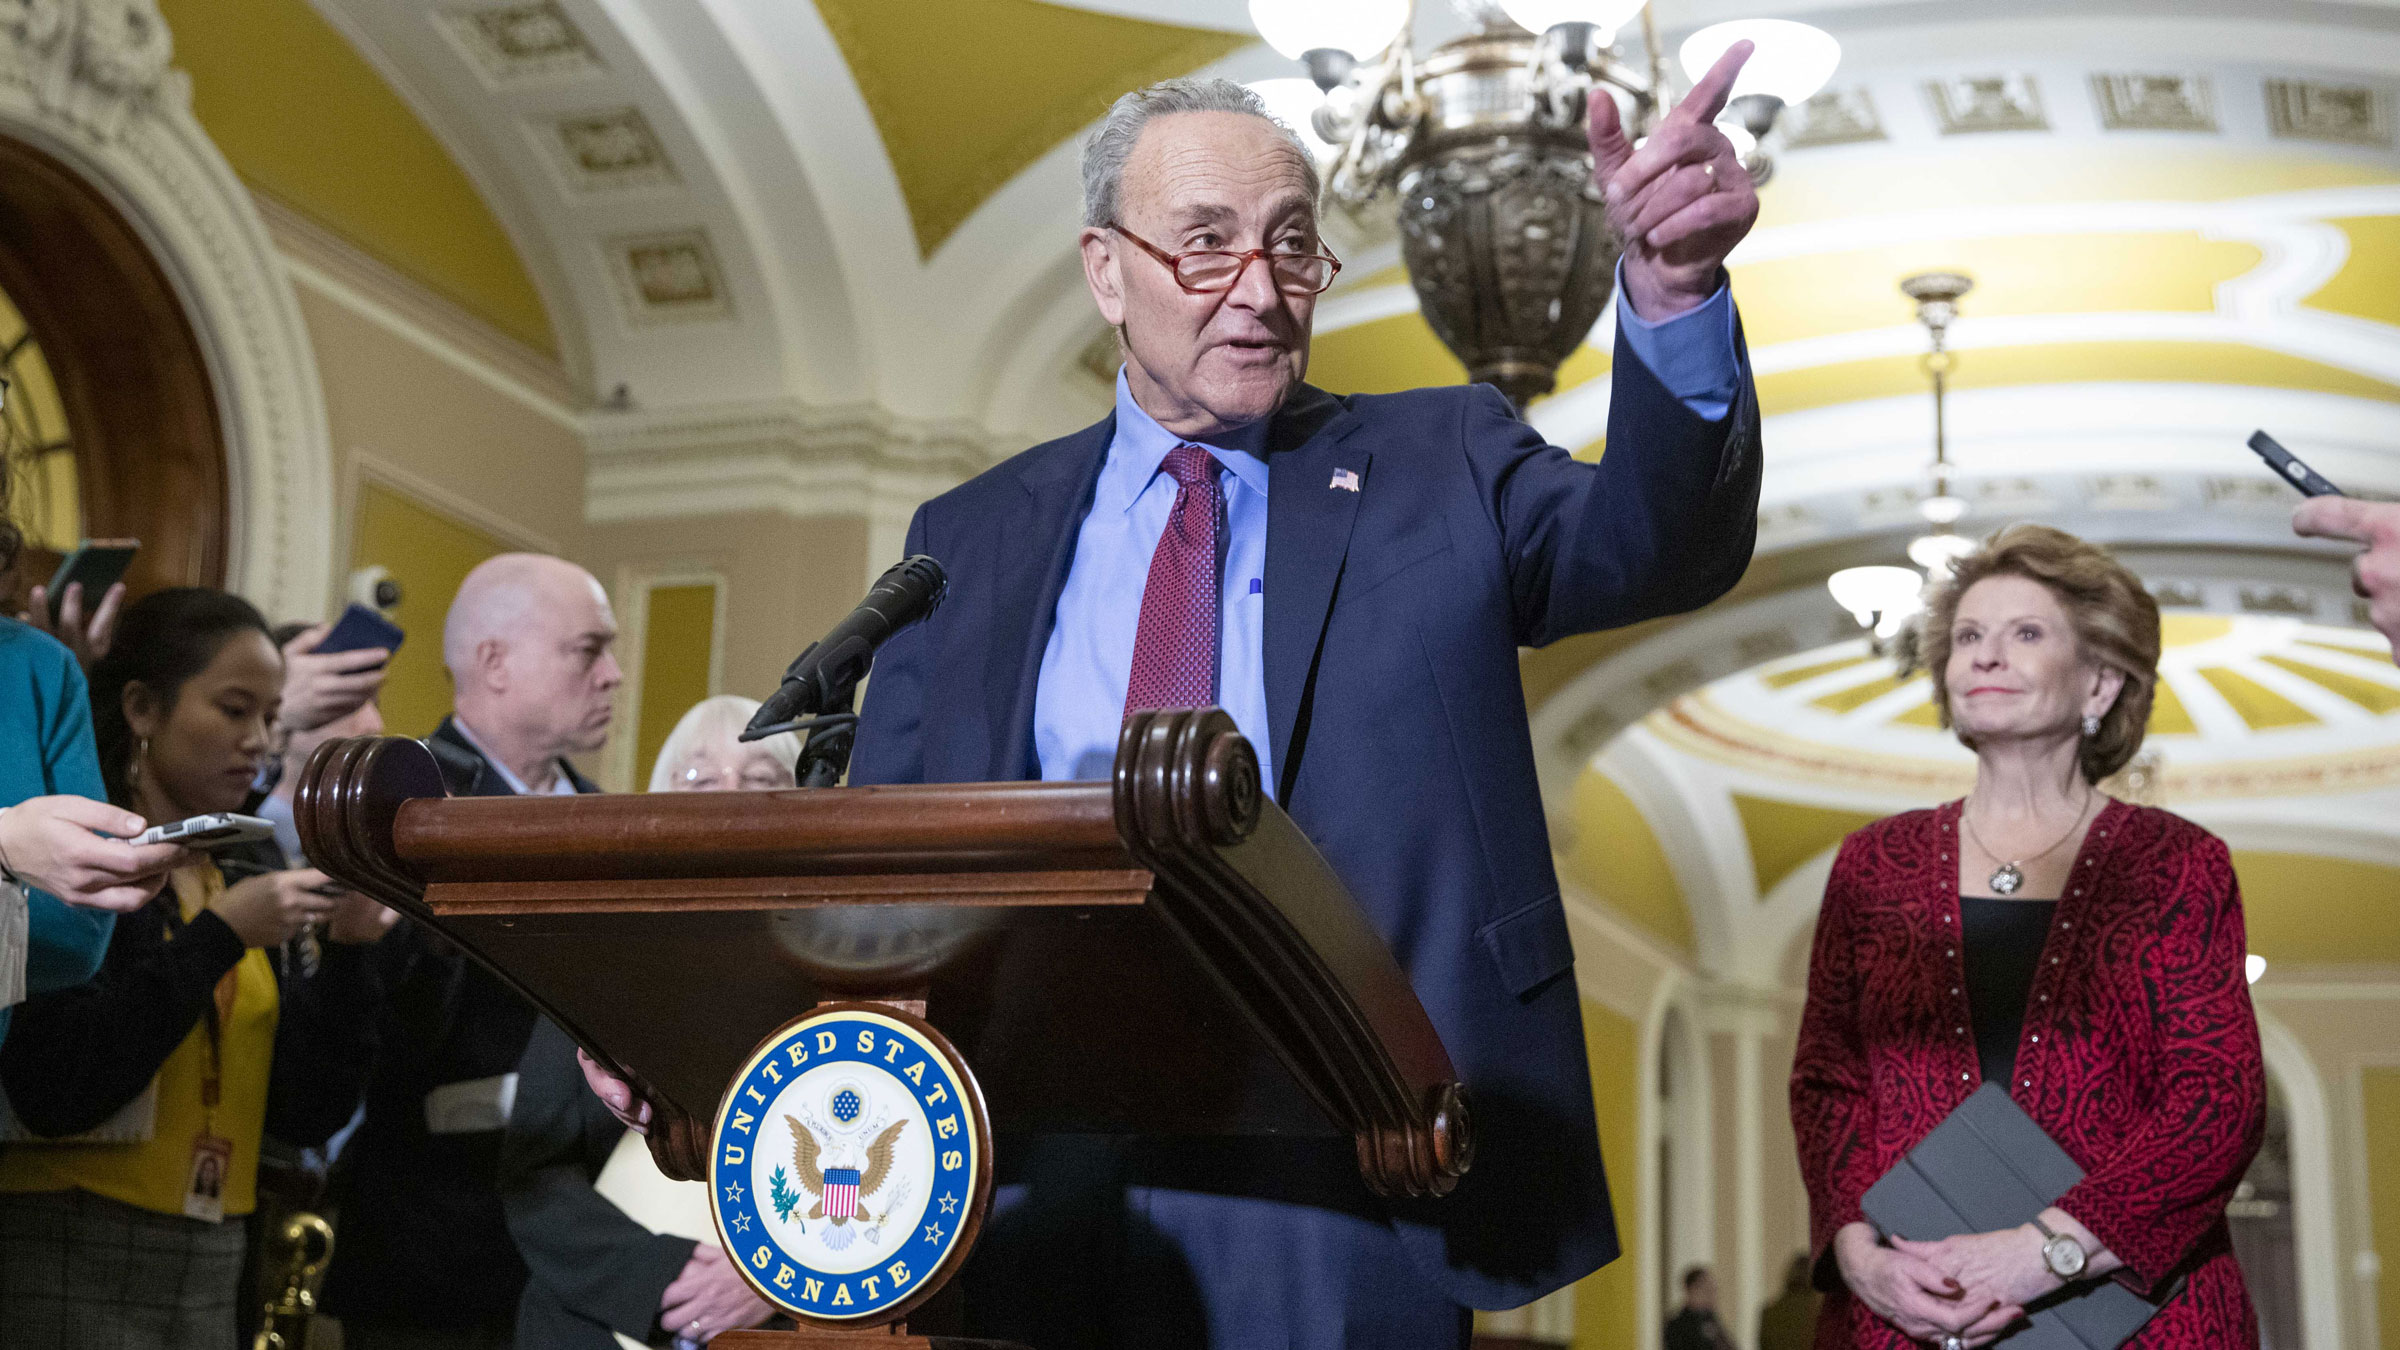 Senate Majority Leader Chuck Schumer speaks at a news conference on Tuesday.